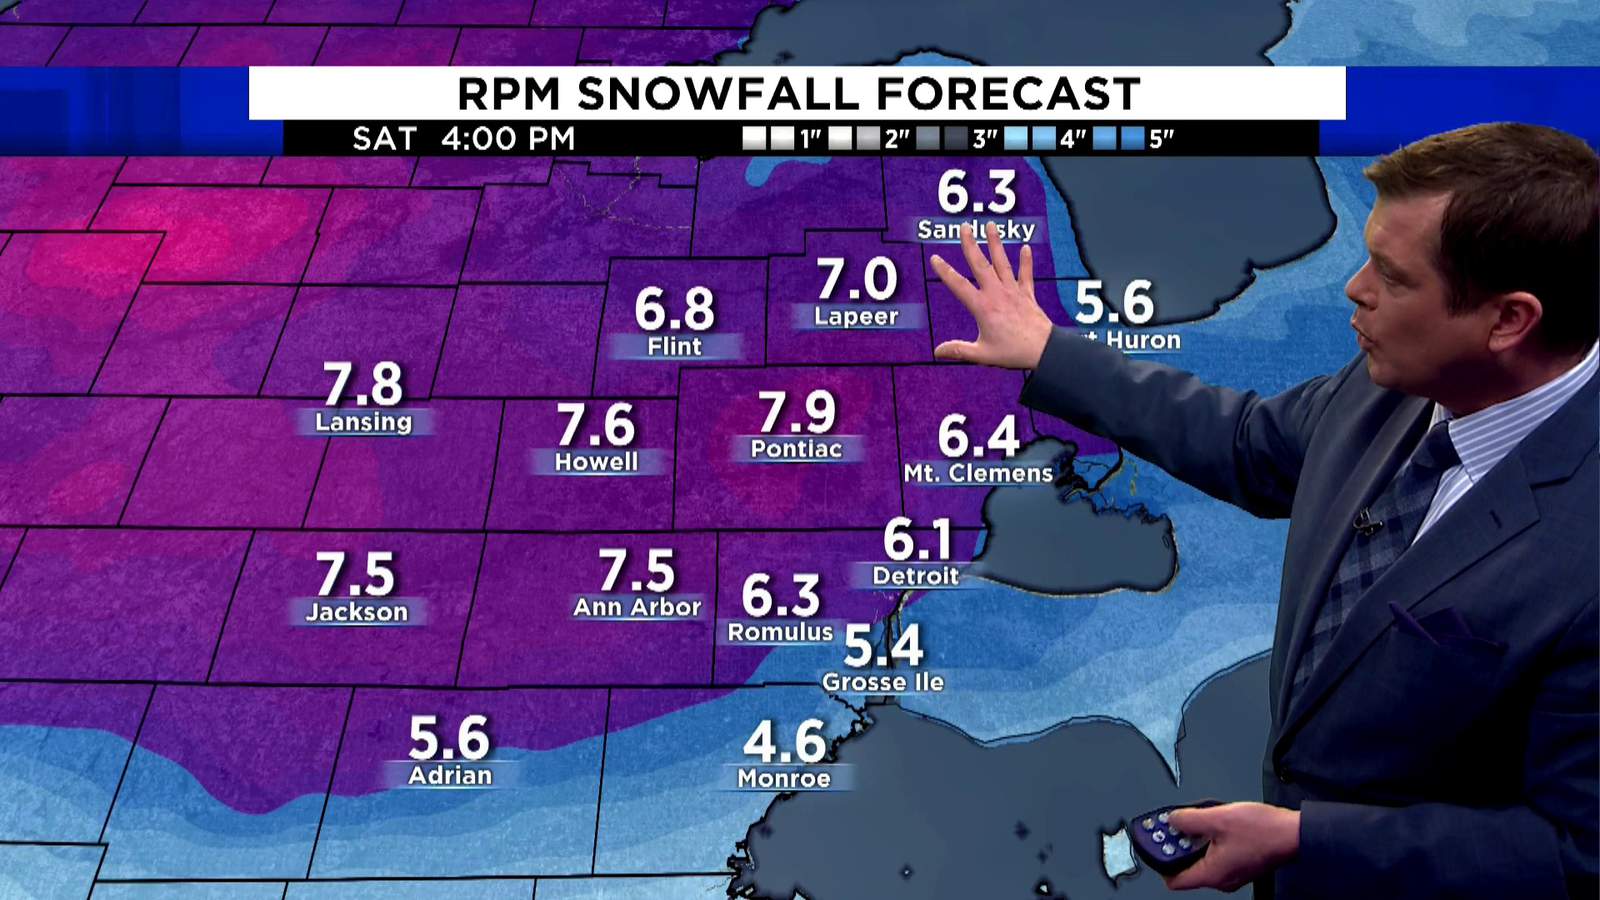 Metro Detroit weather Jan. 16, 2020 -- Heavy snow expected this weekend